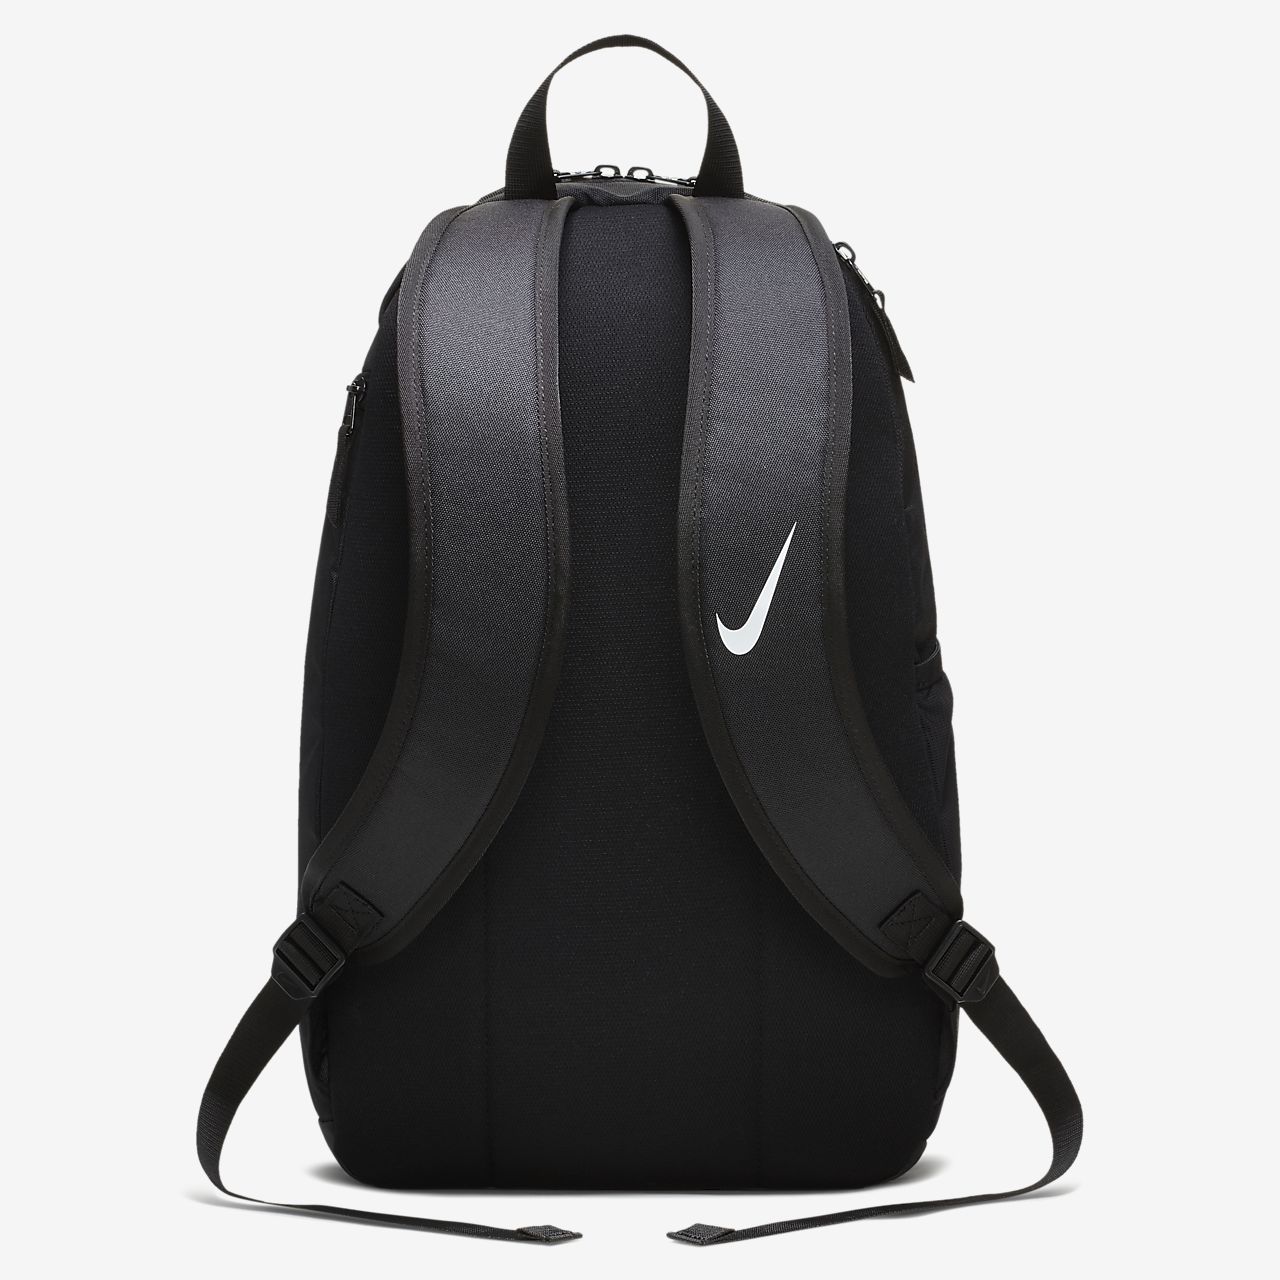 sac a dos nike homme rouge